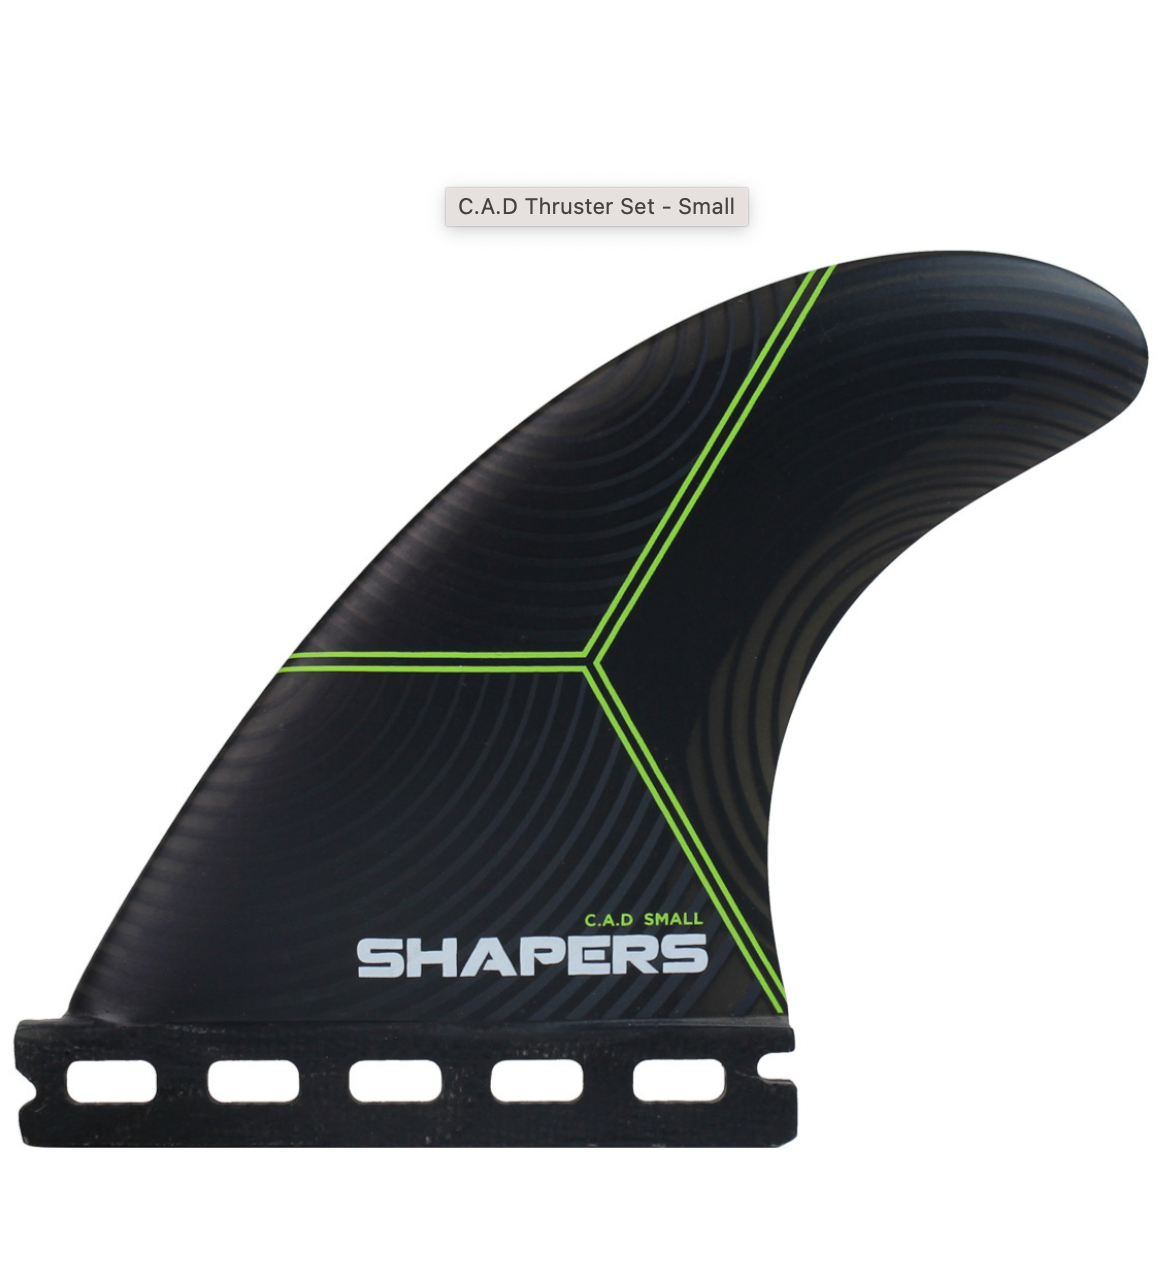 Shapers C.A.D. Small Thruster